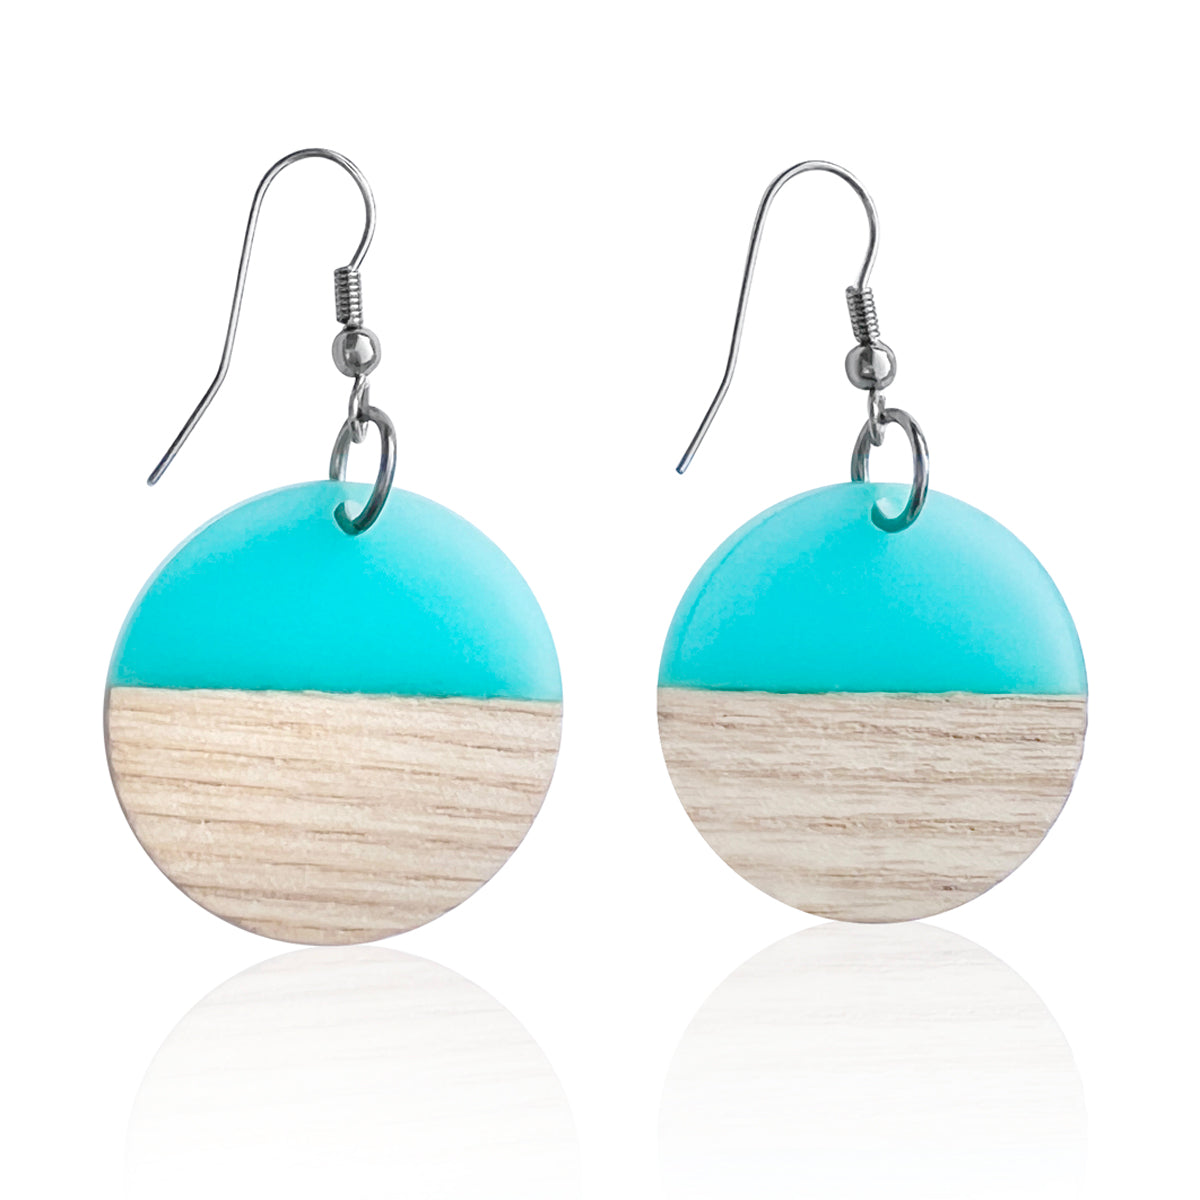 These stunning Coastal Horizon Earrings feature a round pendant made of wood and turquoise blue resin, reminiscent of the sand and ocean. This Coastal Horizon Earrings helps you stay in that Endless Summer mindset all year around. 